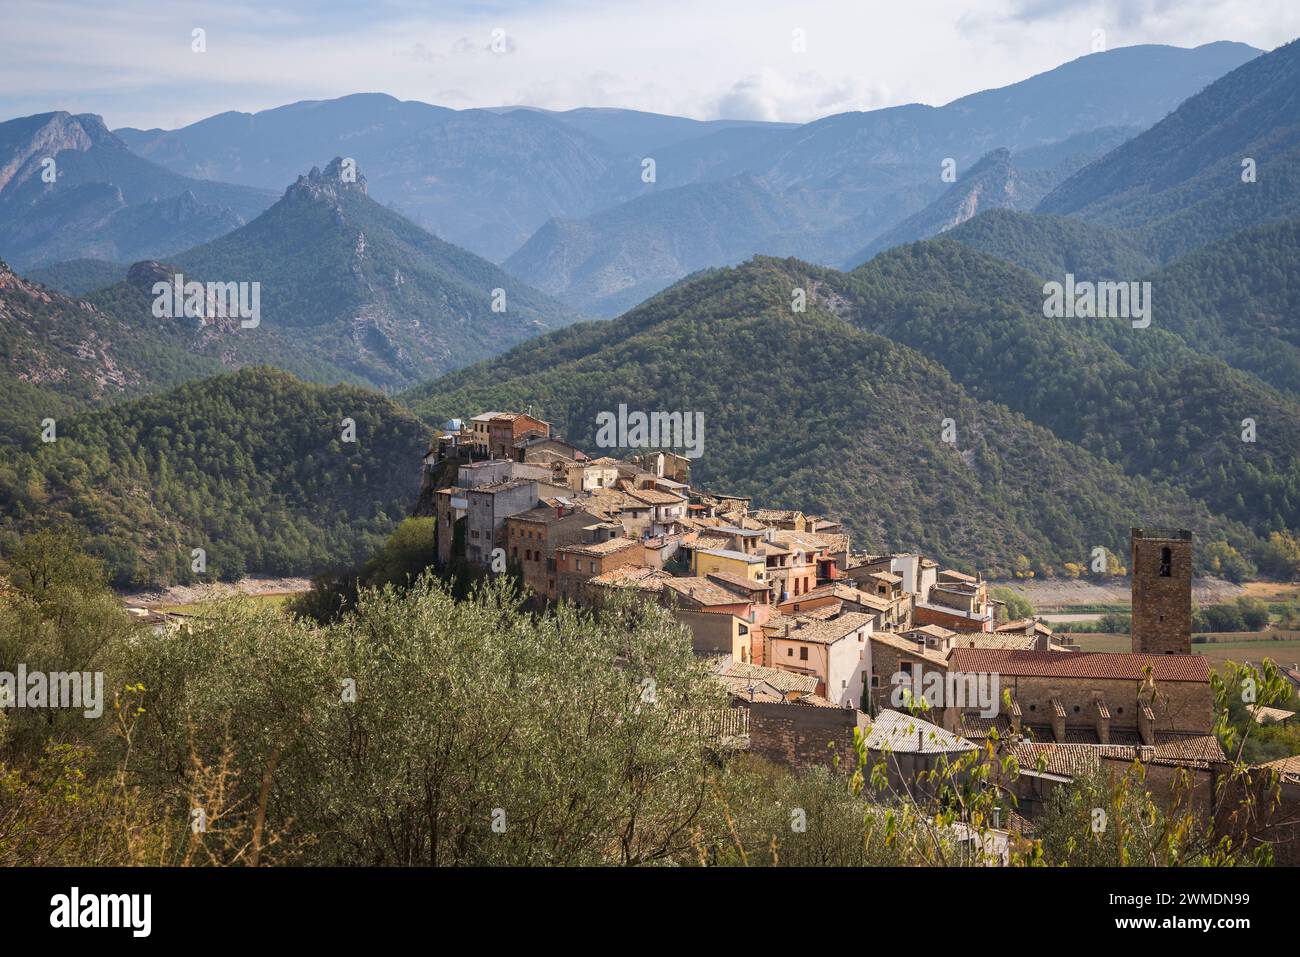 the village of Coll de Nargo nestled in the mountains in Catalonia Stock Photo